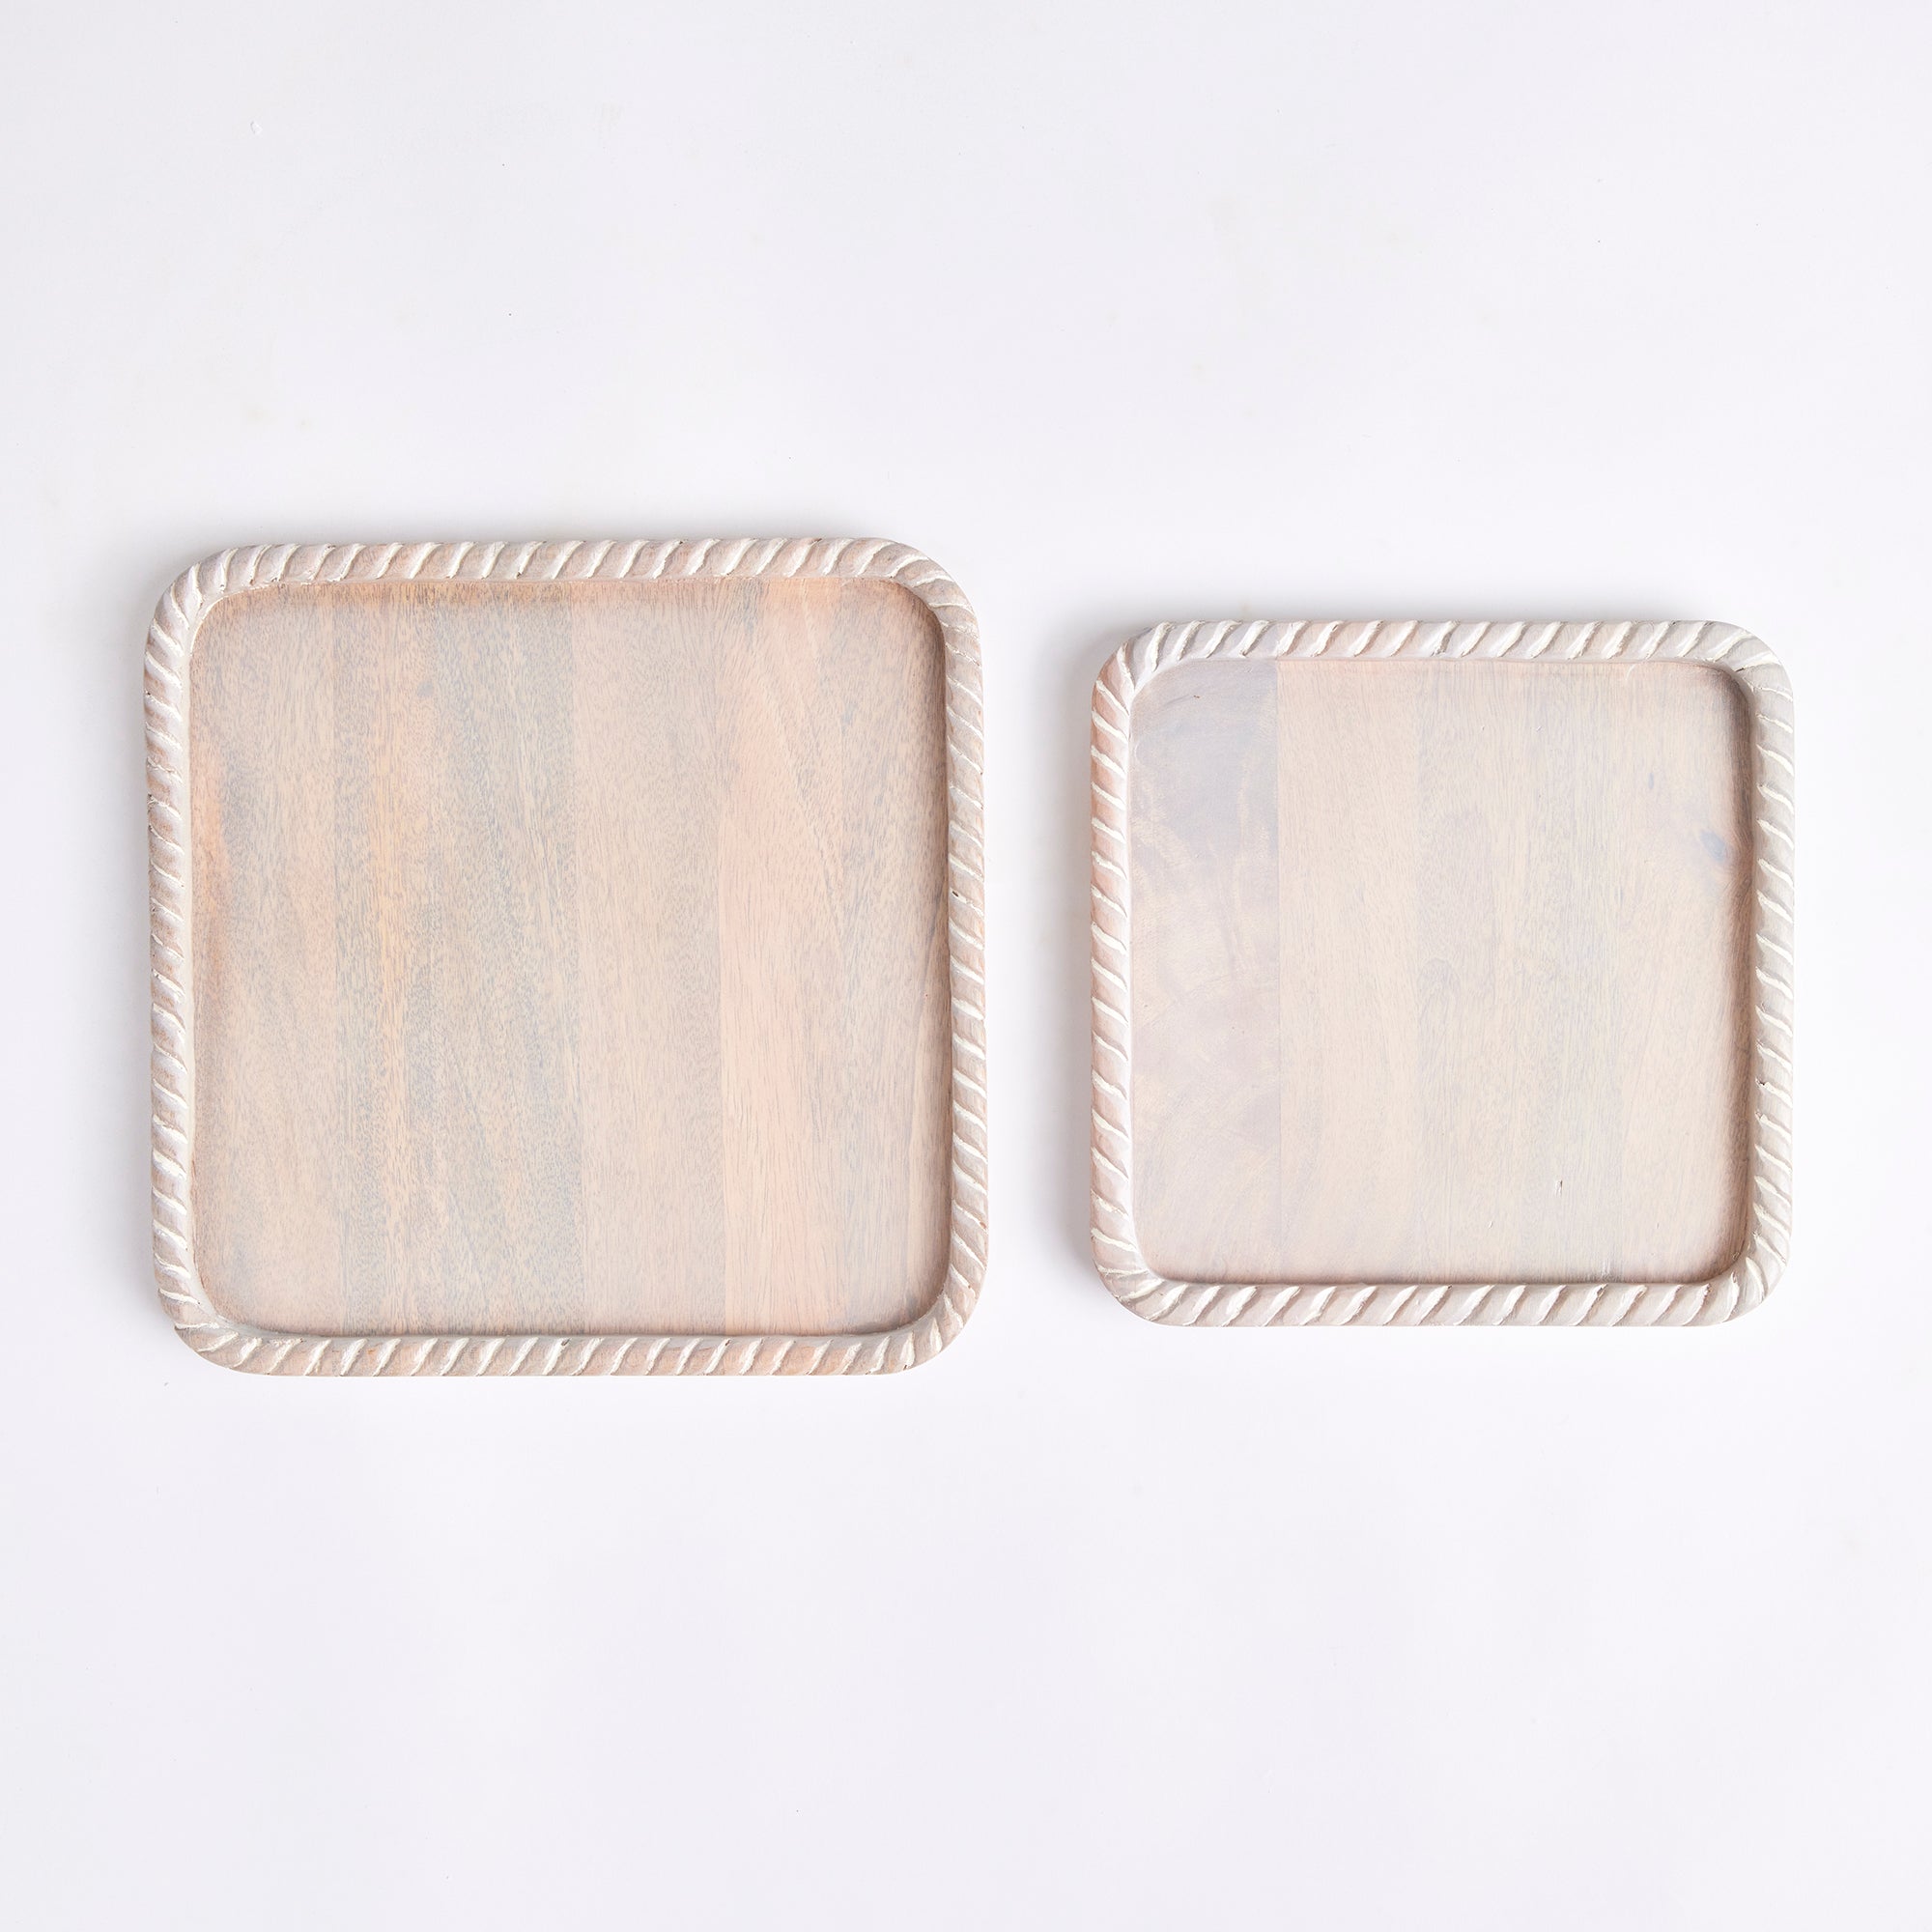 Hand carved from mango wood, this pair of trays is a sweet little accent for baked goods or a cheese tray. A little touch of natural wood tone is always on trend. Amethyst Home provides interior design, new construction, custom furniture, and area rugs in the Tampa metro area.